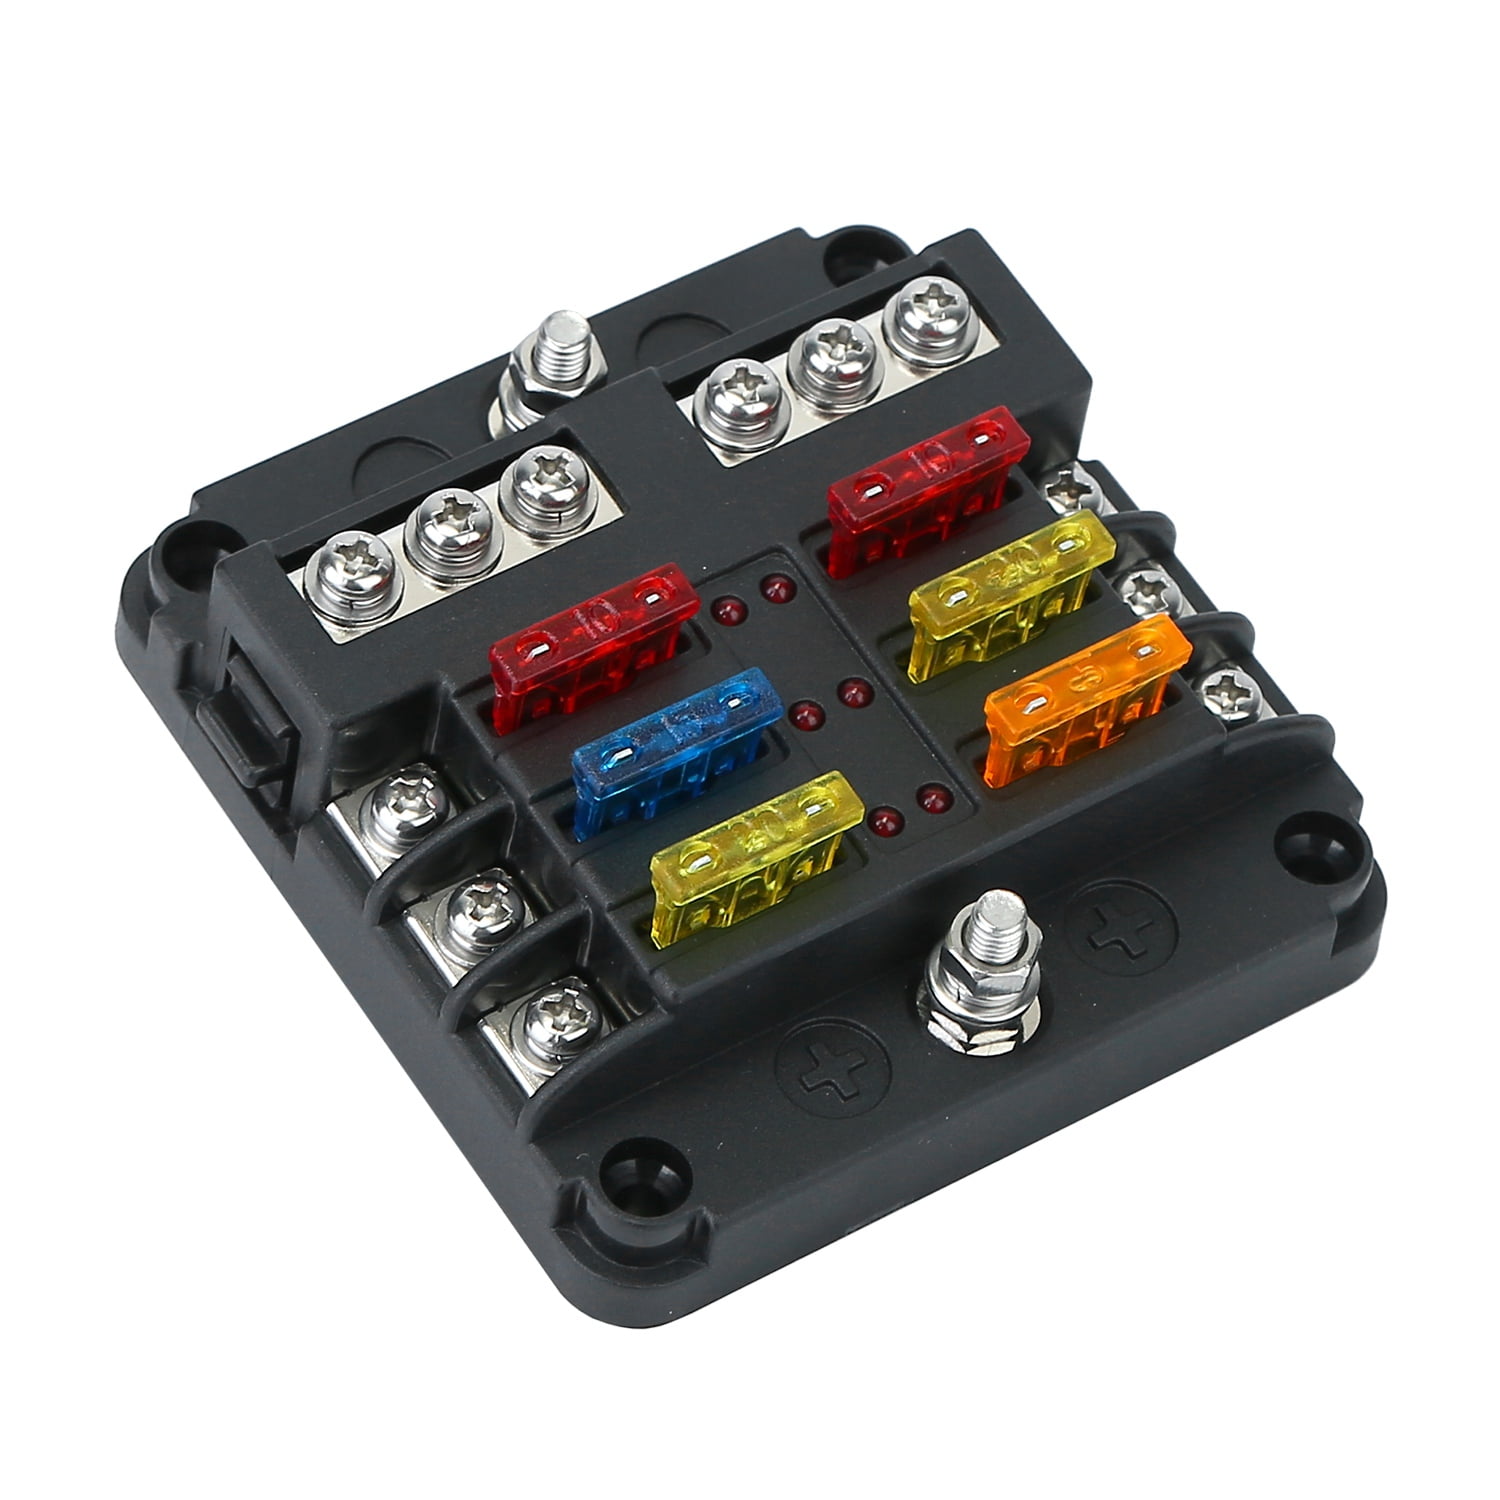 6-Way Car Blade Fuse Box LED Indicator Blown Fuse Protection Cover Fuse Block 